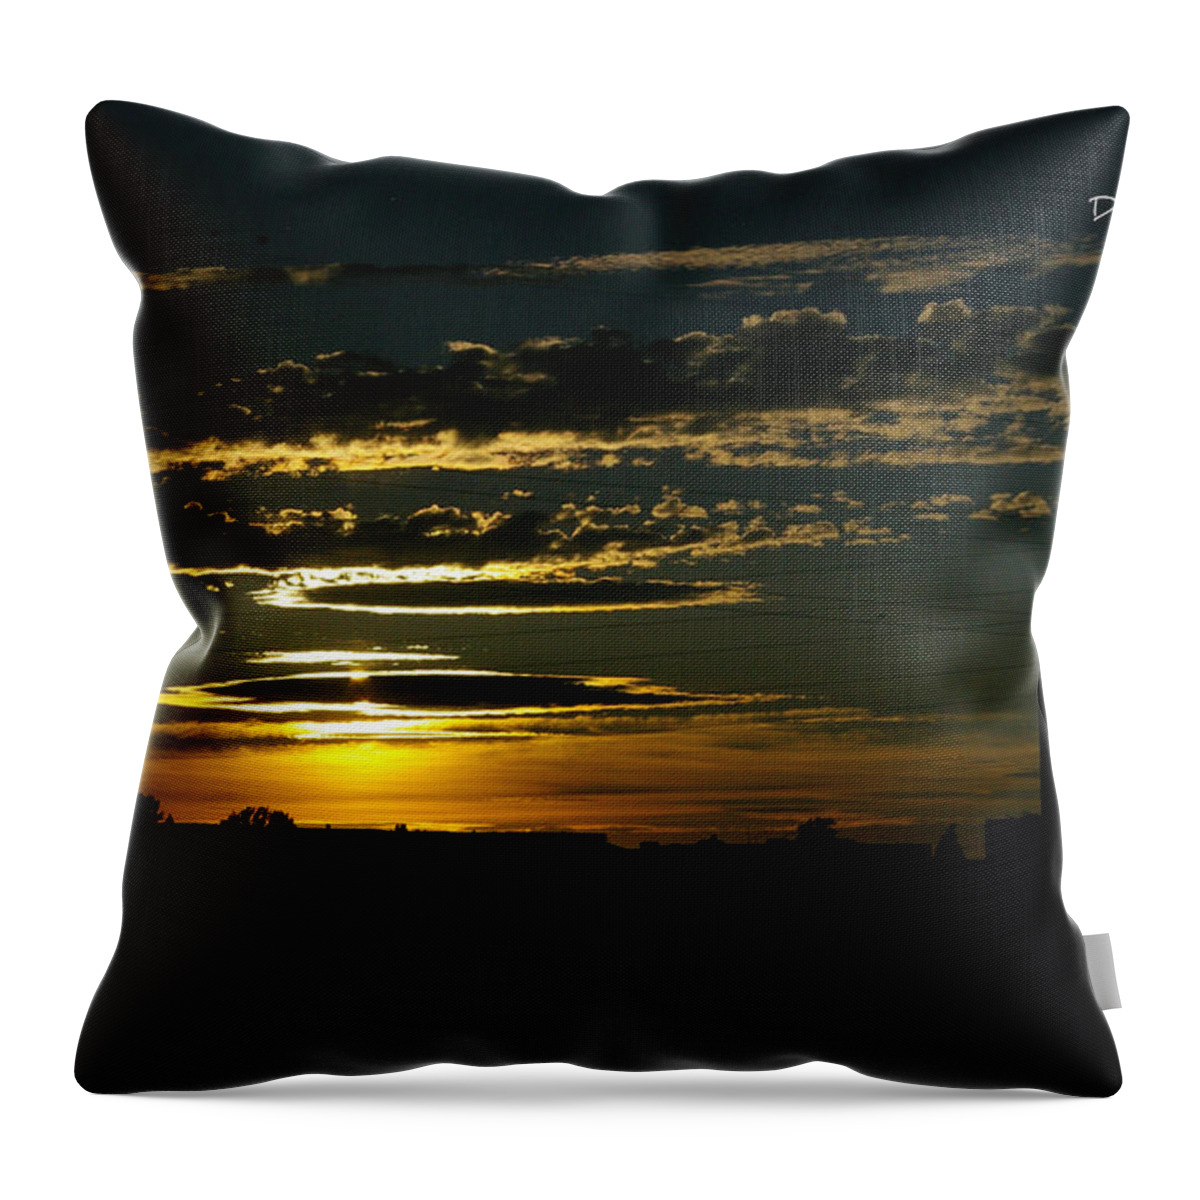  Throw Pillow featuring the photograph Sun Kissed by Kristy Urain